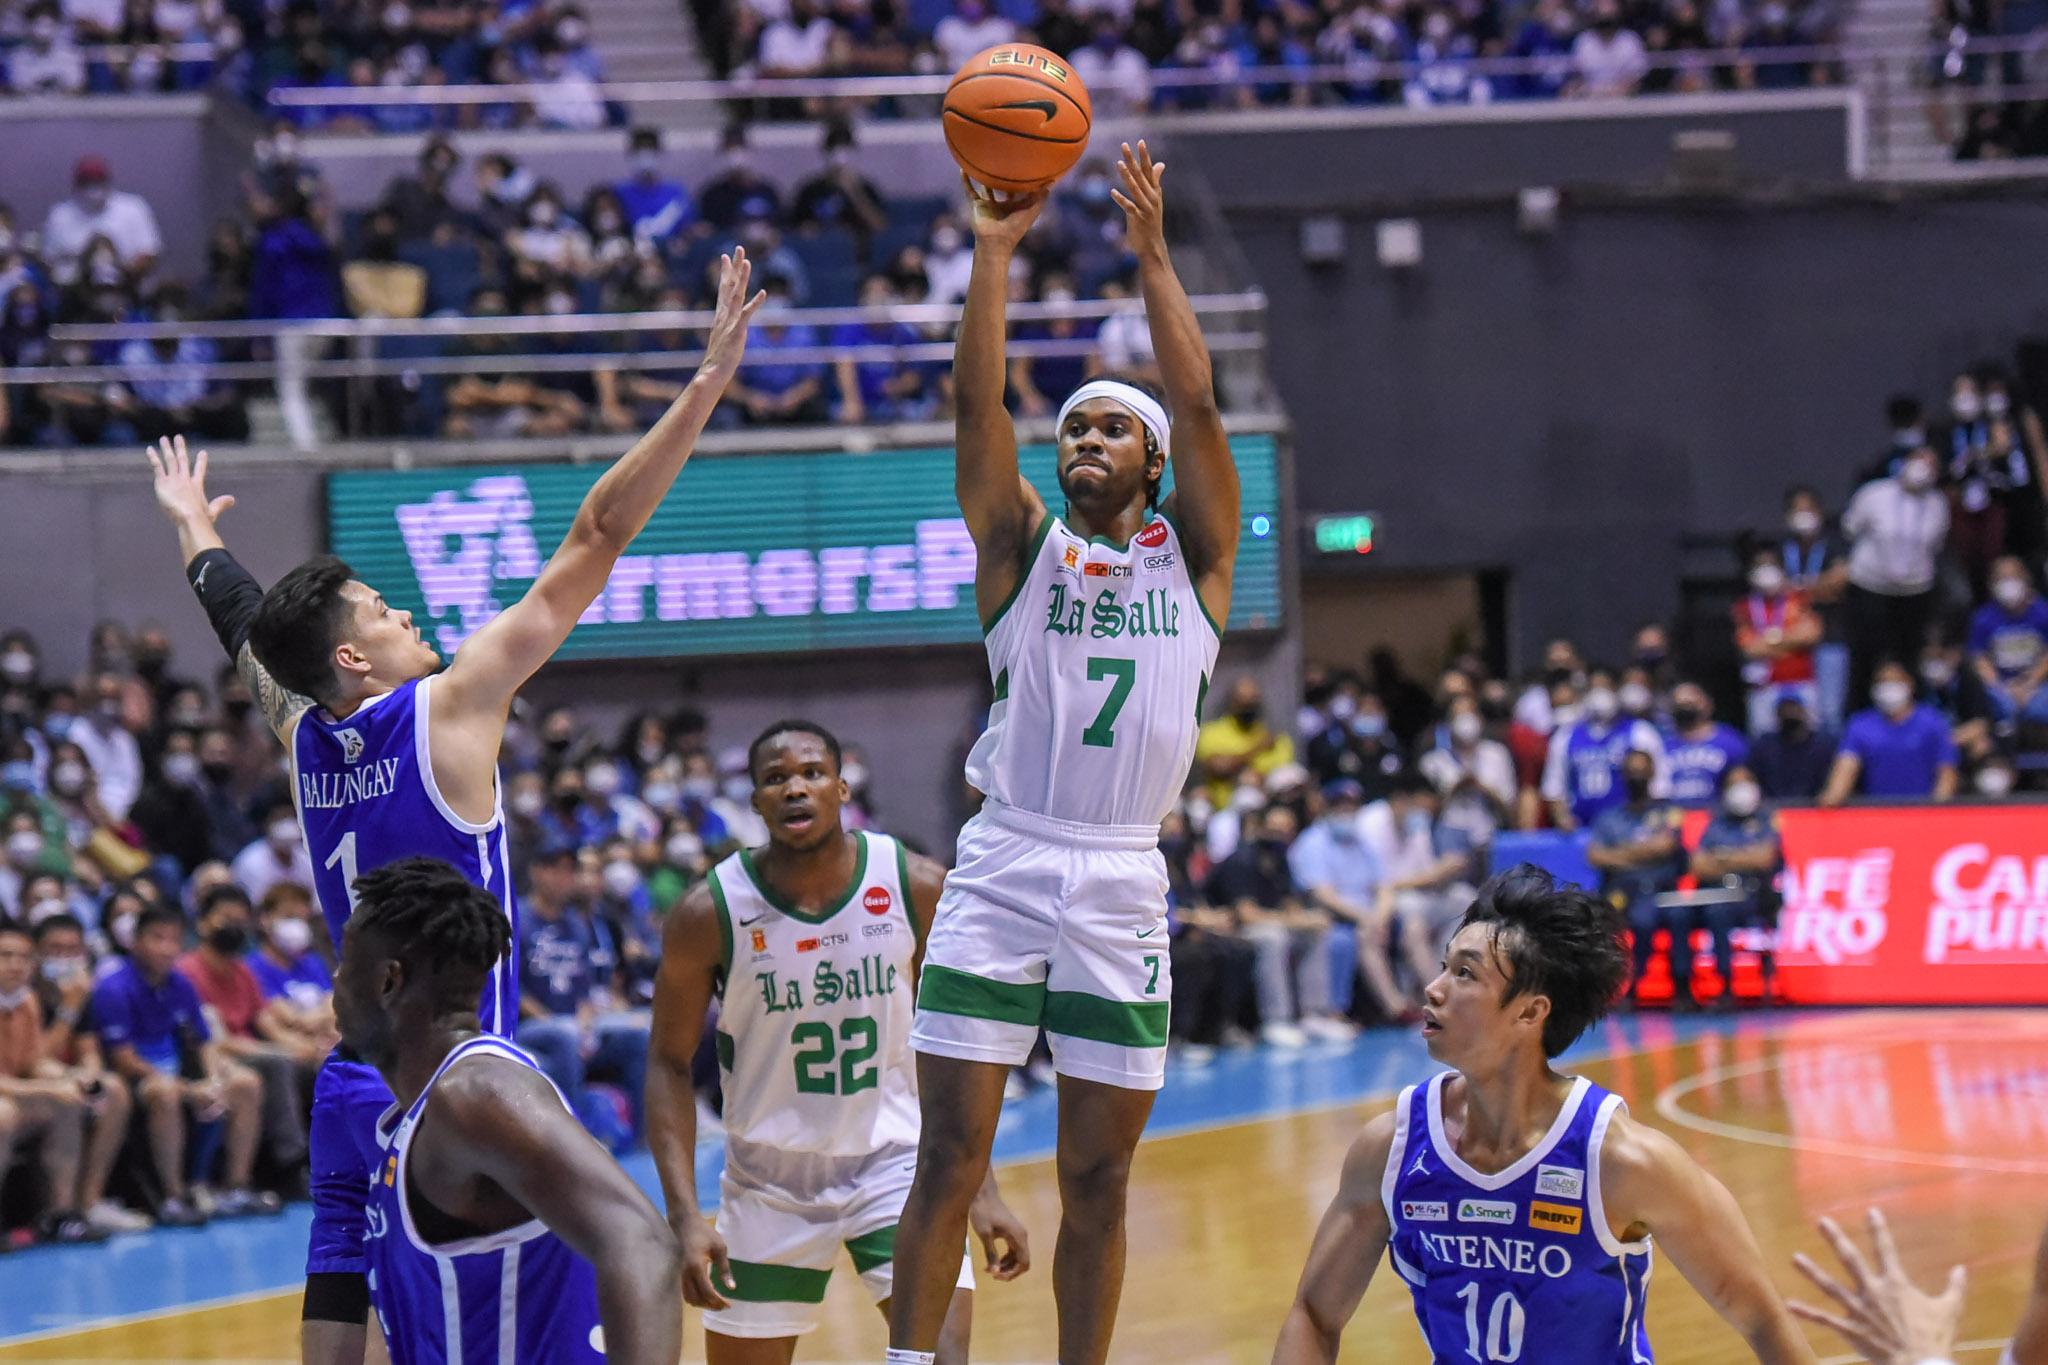 The Ateneo-La Salle rivalry lives on as DLSU take on ADMU in the UAAP Season 85 men's basketball tournament 